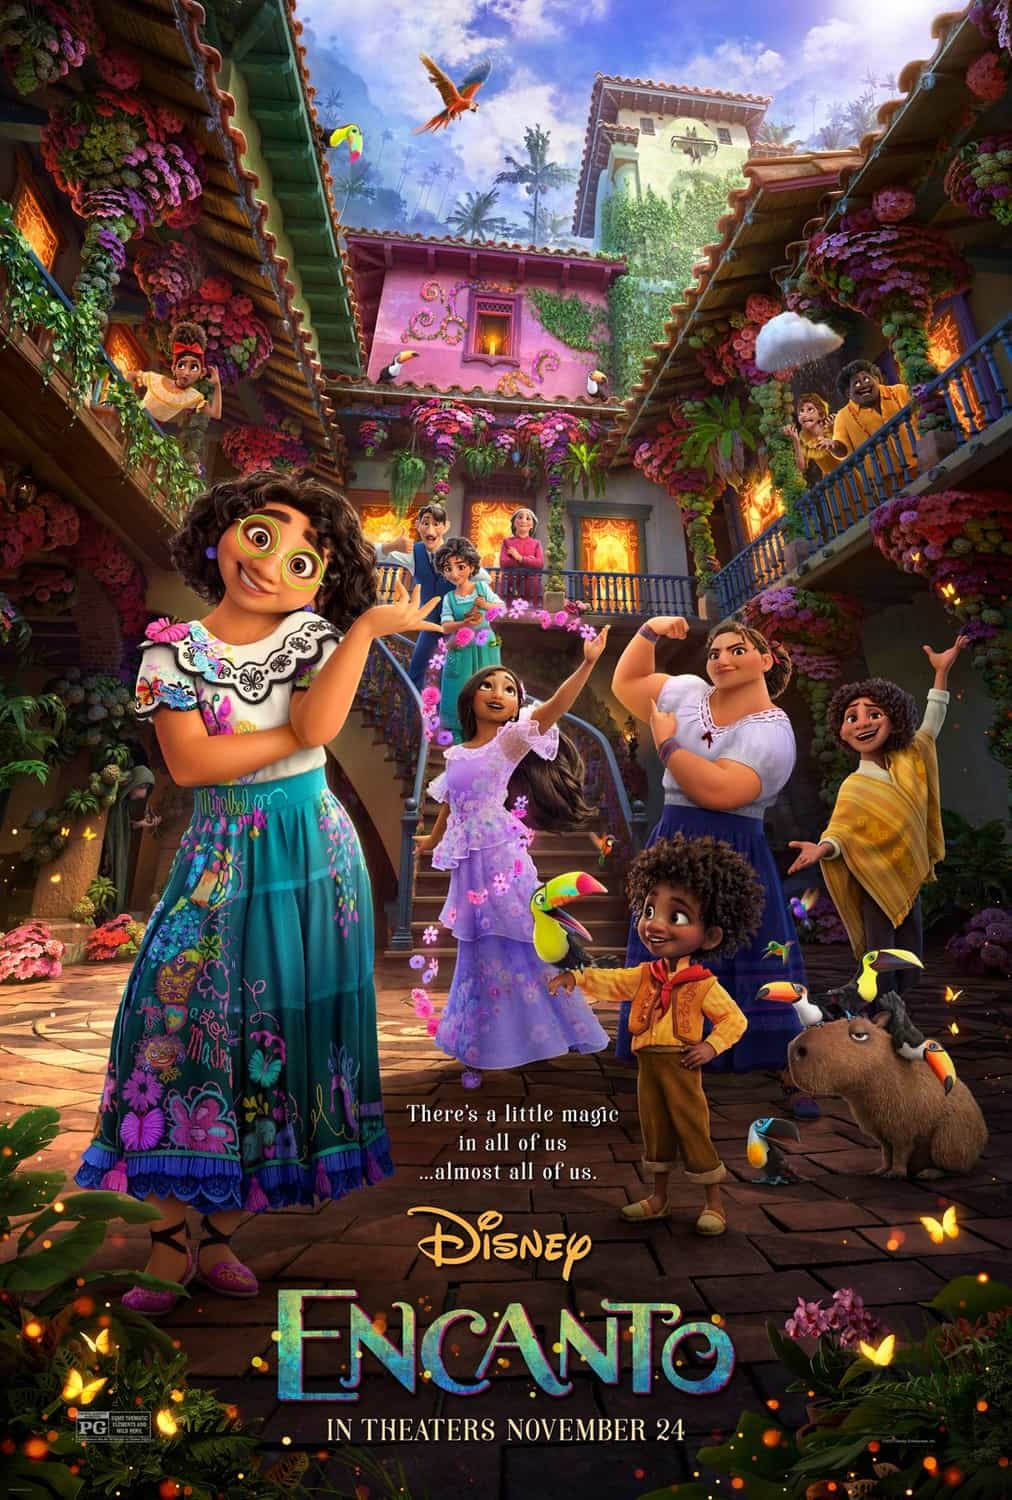 US Box Office Weekend Report 26th - 28th November 2021:  Disney animated movie Encanto tops the US box office on its debut weekend with House of Gucci new at 3